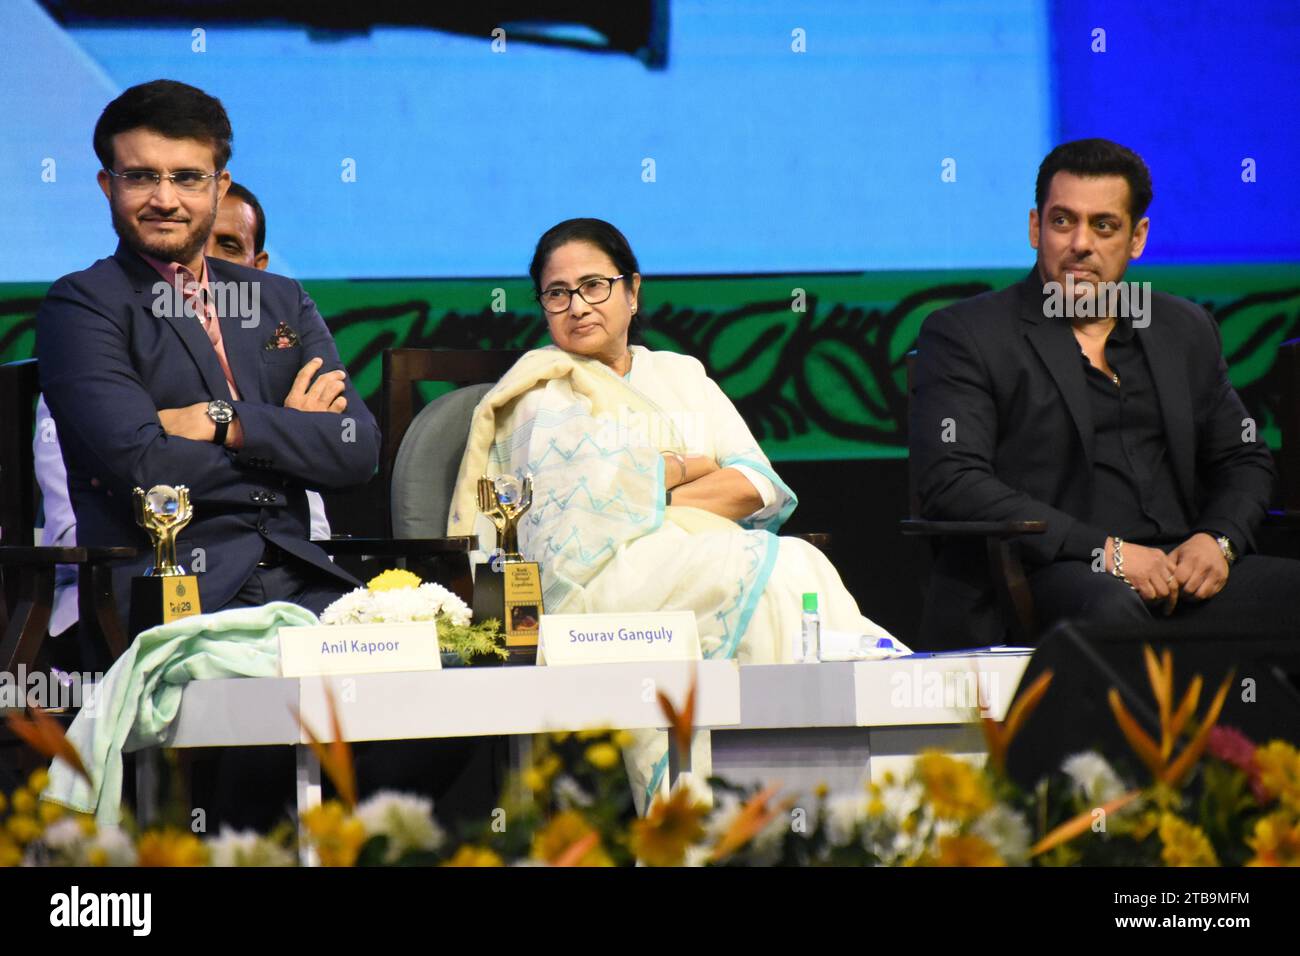 Kolkata, West Bengal, India. 5th Dec, 2023. Cricketer turned industrialist Sourav Ganguly (L), Mamata Banerjee (M), Chief Minister of West Bengal, and Bollywood star actor Salman Khan (R) at the inaugural function of the 29th edition of the Kolkata International Film Festival (KIFF 29), organized by the Information and Cultural Affairs Department, Government of West Bengal, which is scheduled to be held between 5 - 12 December, 2023 in Kolkata, the cultural capital of the State of West Bengal. this festival is accredited by the International Federation of Film Producers' Association or FIAP Stock Photo